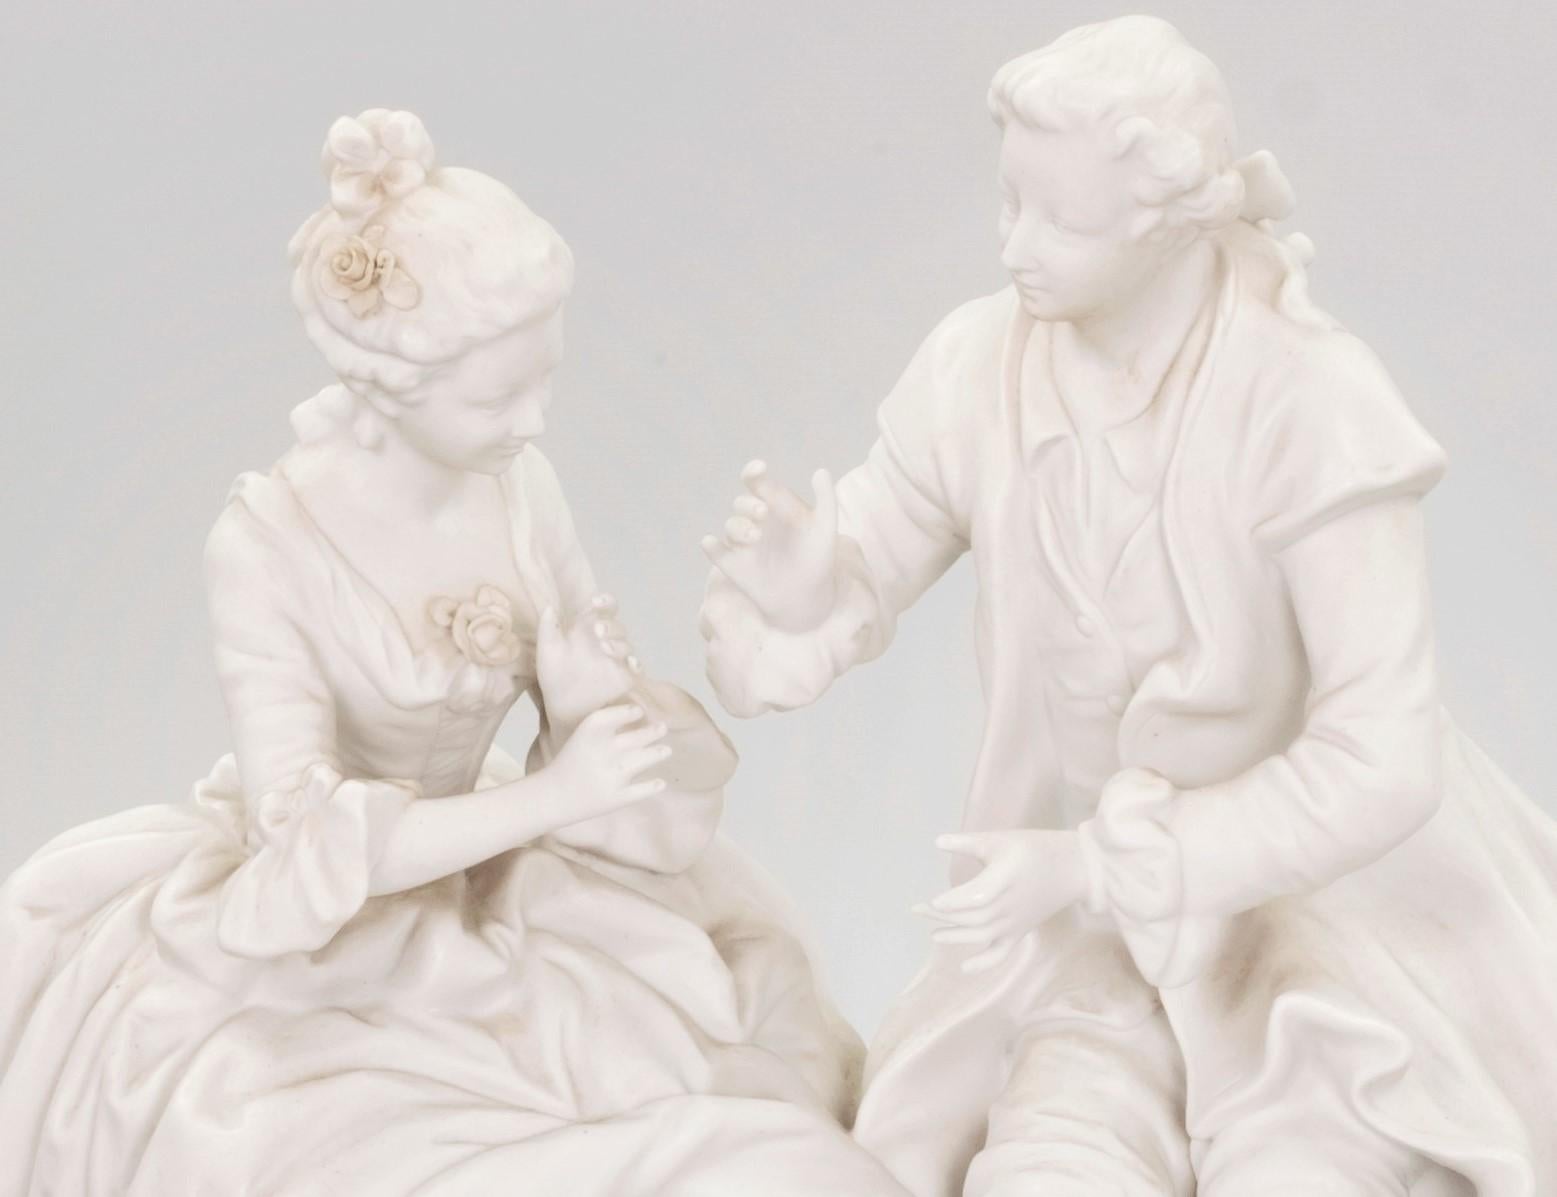 A 19th century French bisque porcelain figurine of a couple seated and engaged in a conversation. The figurine is marked on back and numbered 